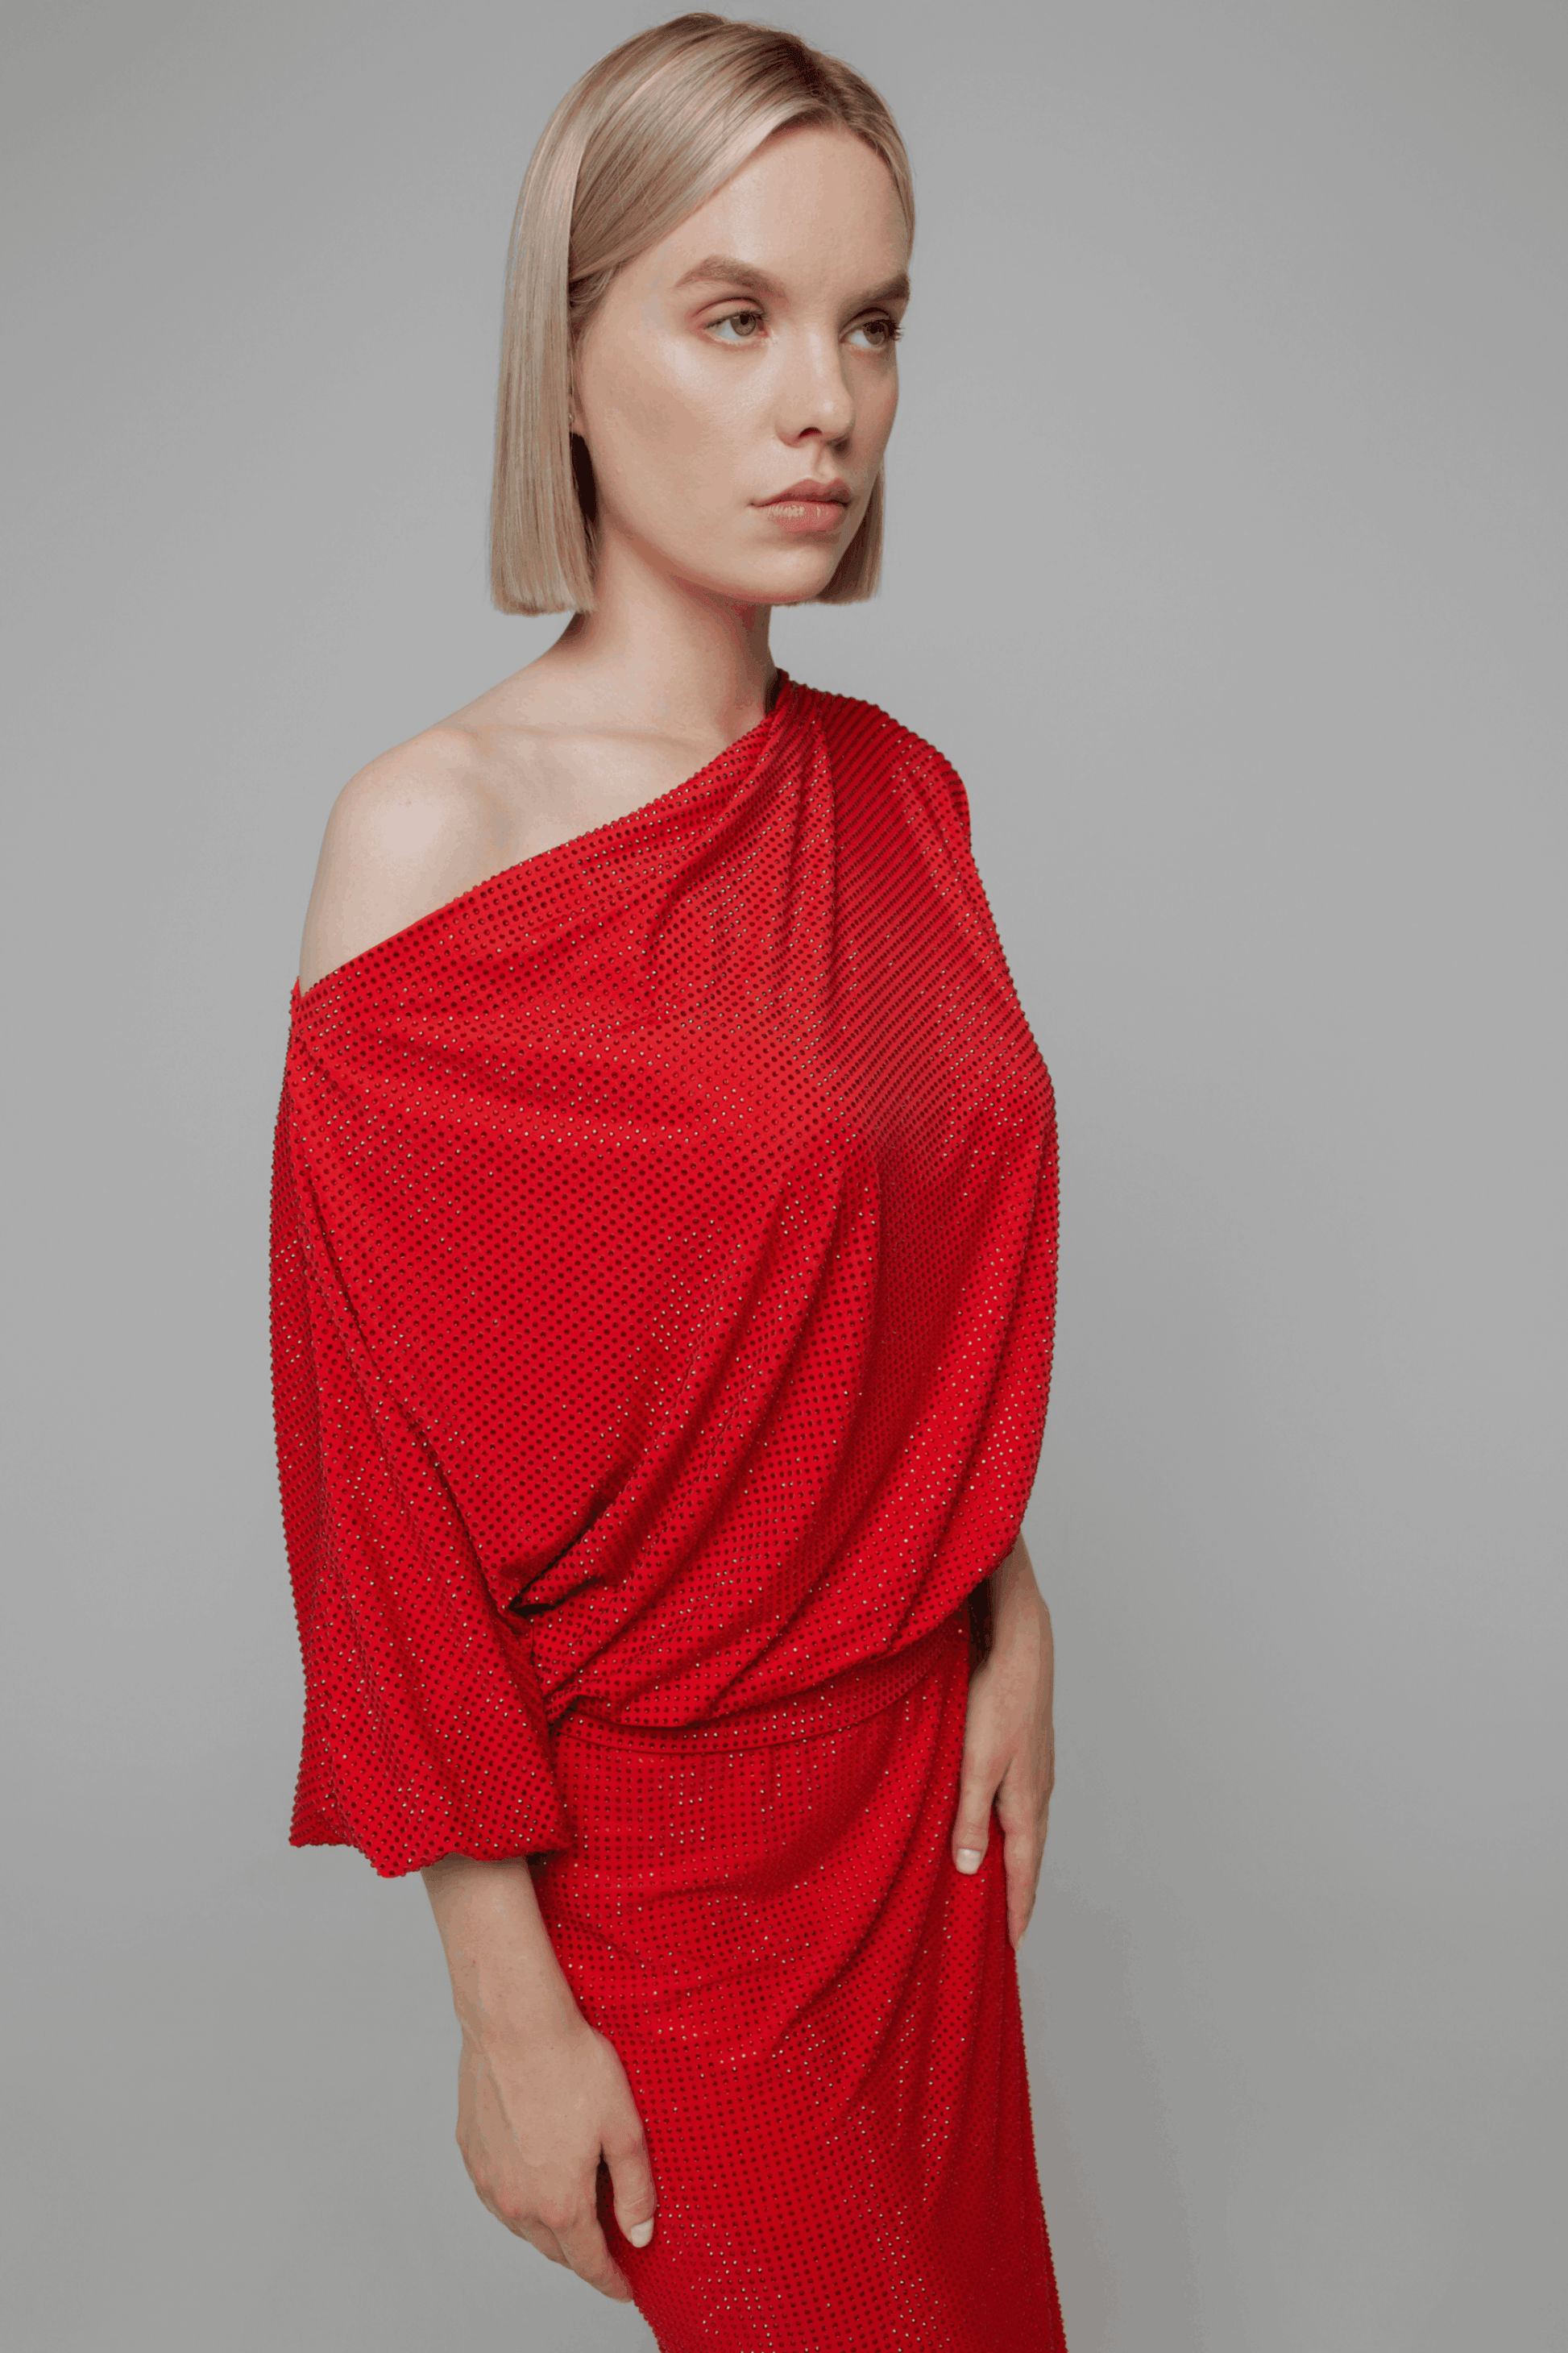 Exquisite detail of Crystal Cowlneck Three Quarter Dolman Sleeves showcasing the fine craftsmanship and elegant design characteristic of Axinia Collection 's luxury collection.